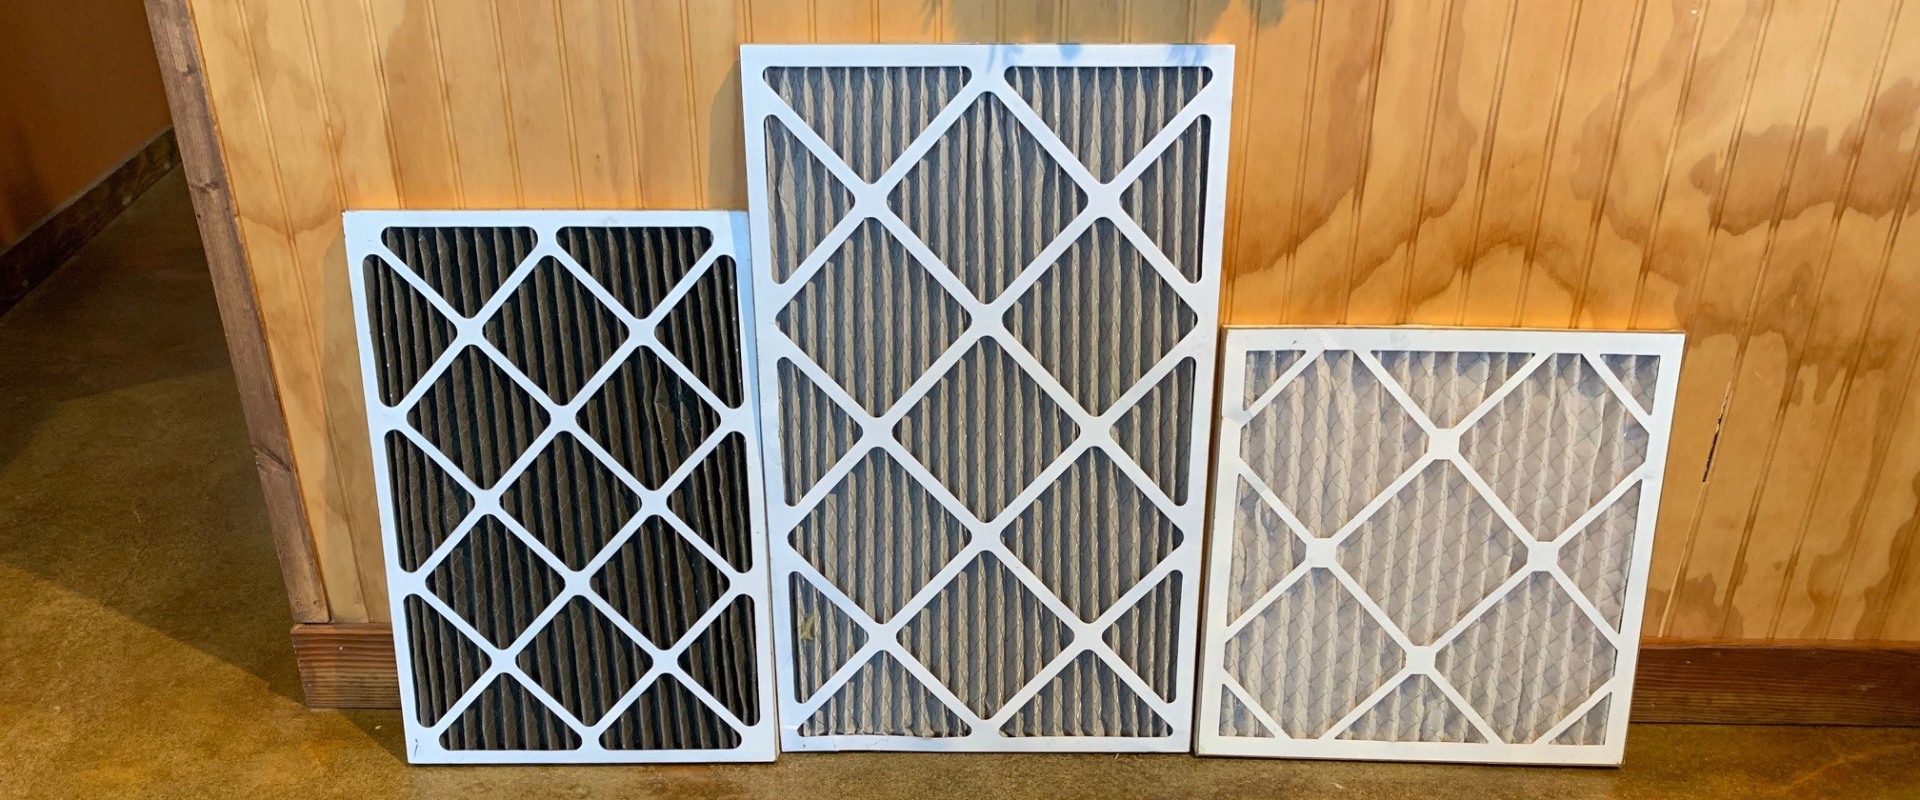 Is It Normal for Air Filters to Stick Out?